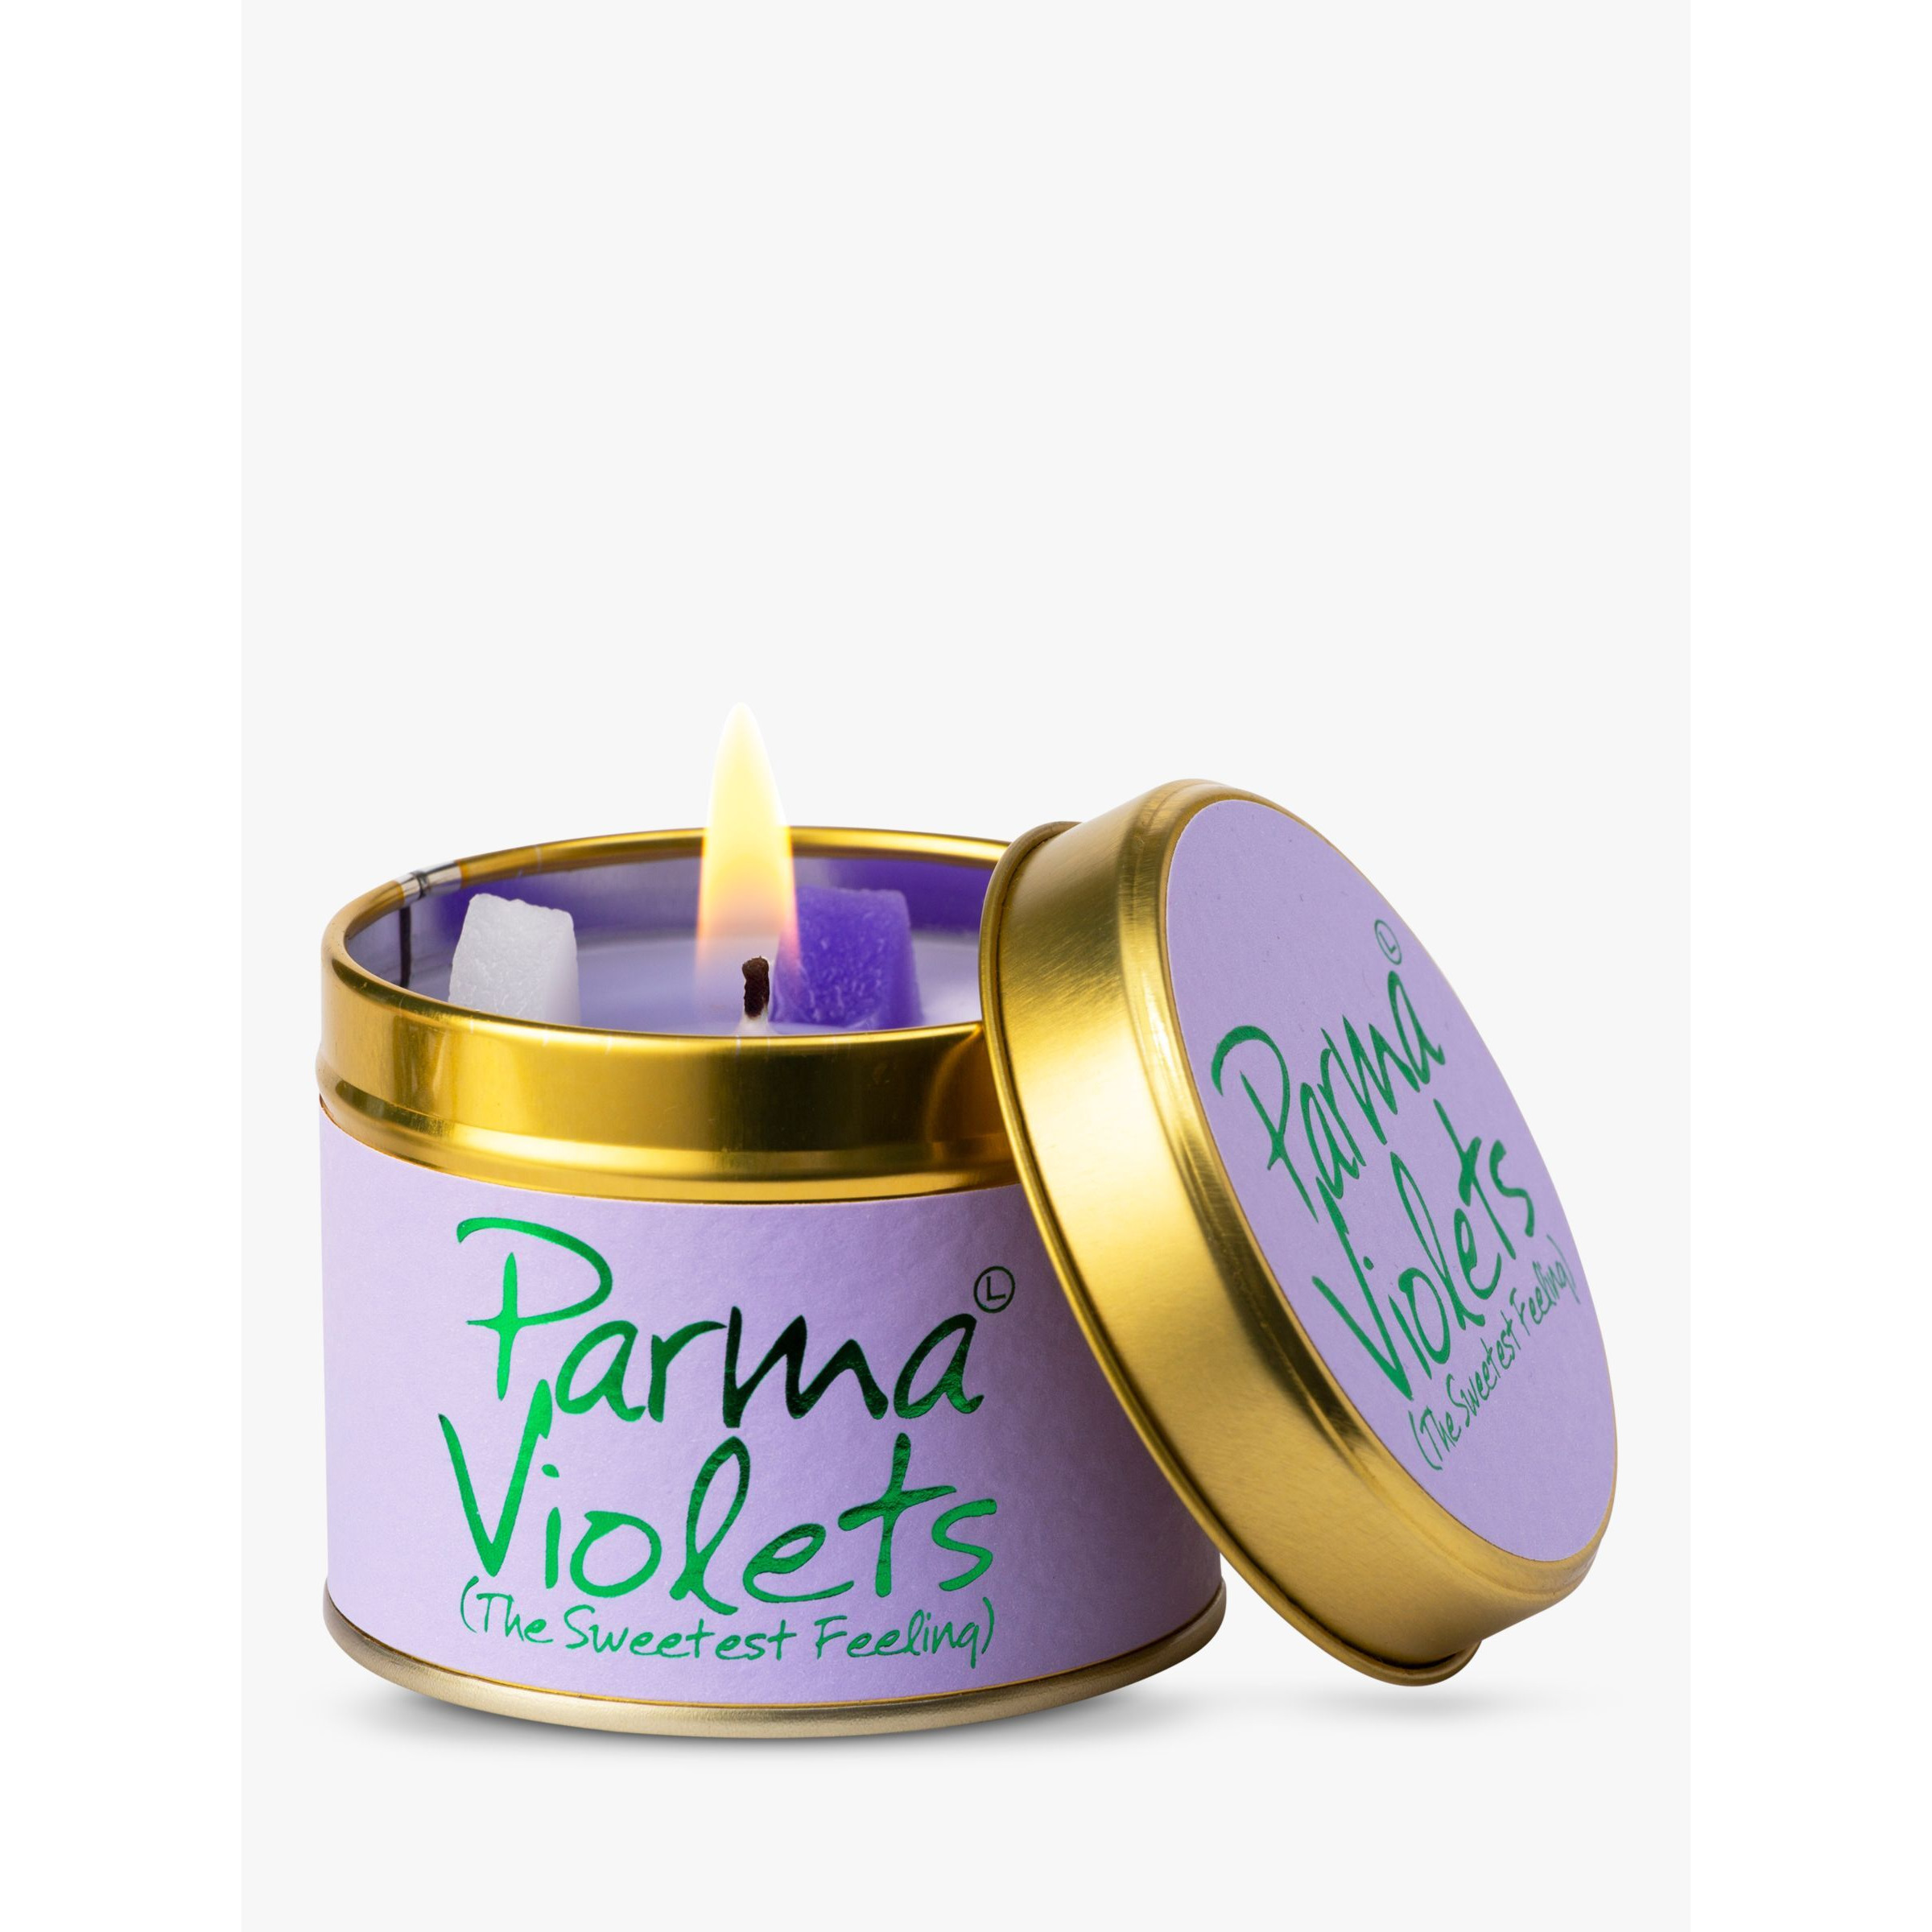 Lily-flame Parma Violets Scented Tin Candle, 230g - image 1